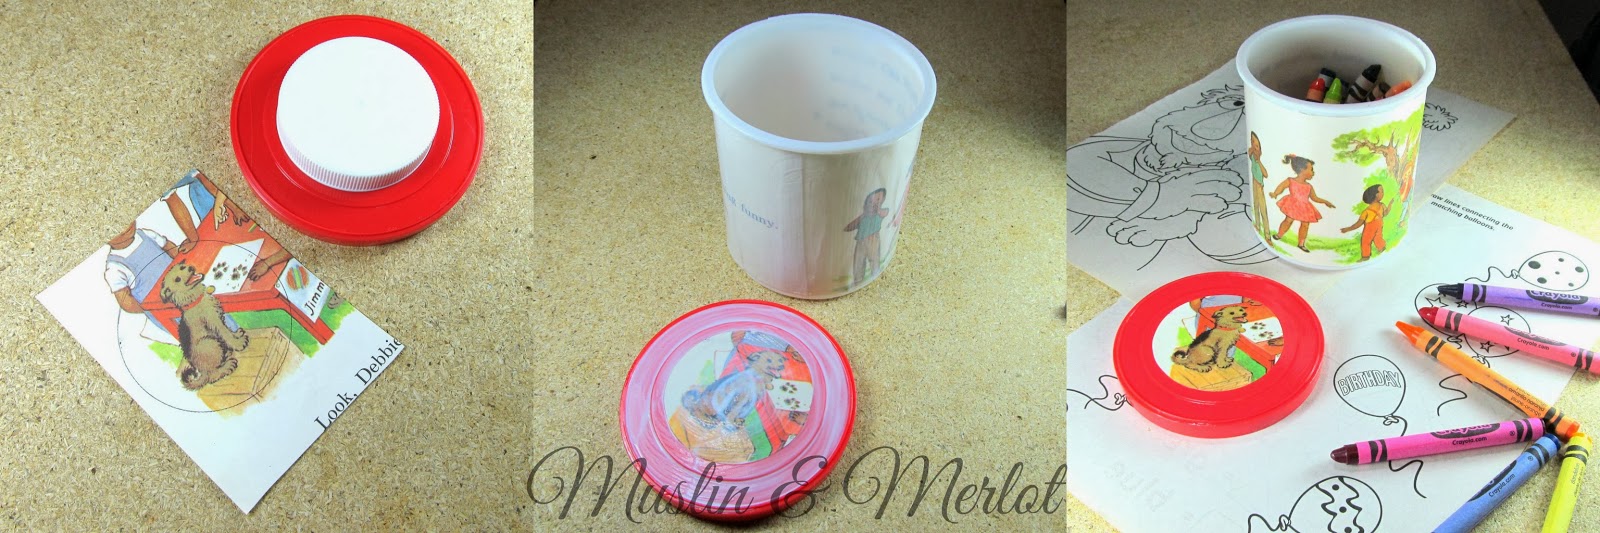 Upcycled Crayon Container by Muslin & Merlot